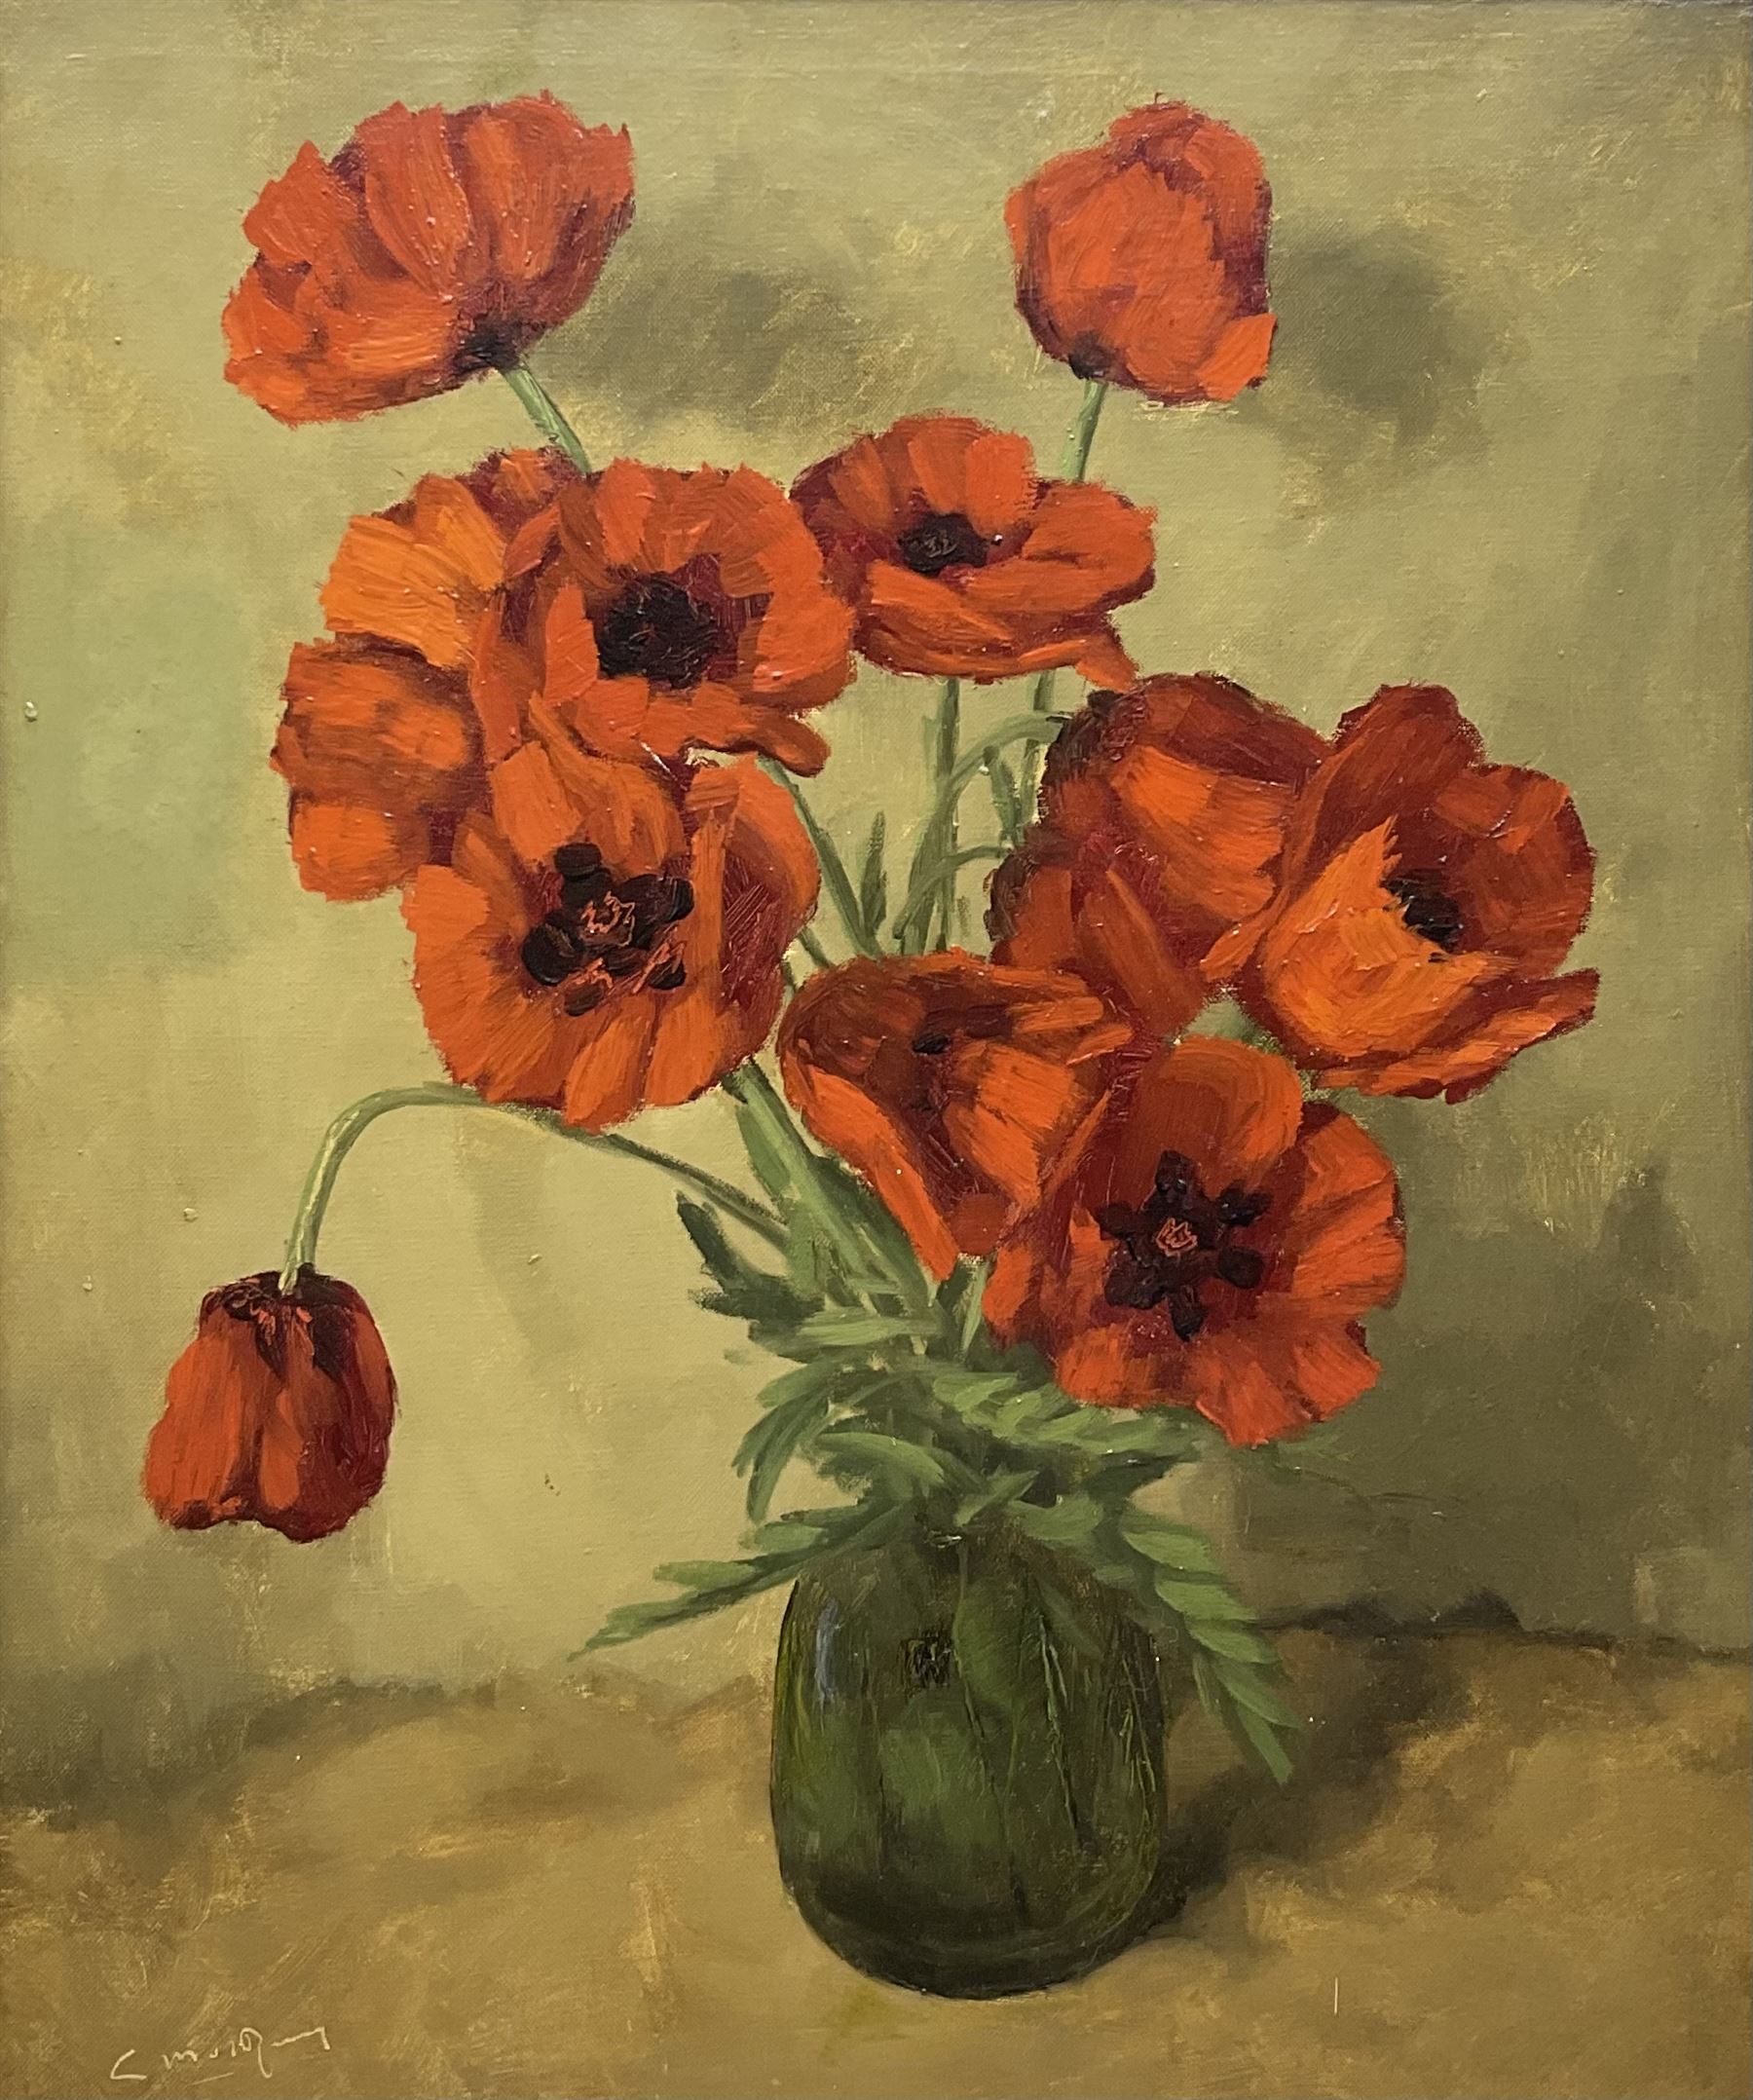 C M Van Rooy (Dutch 20th century): Still Life of Poppies in a Vase